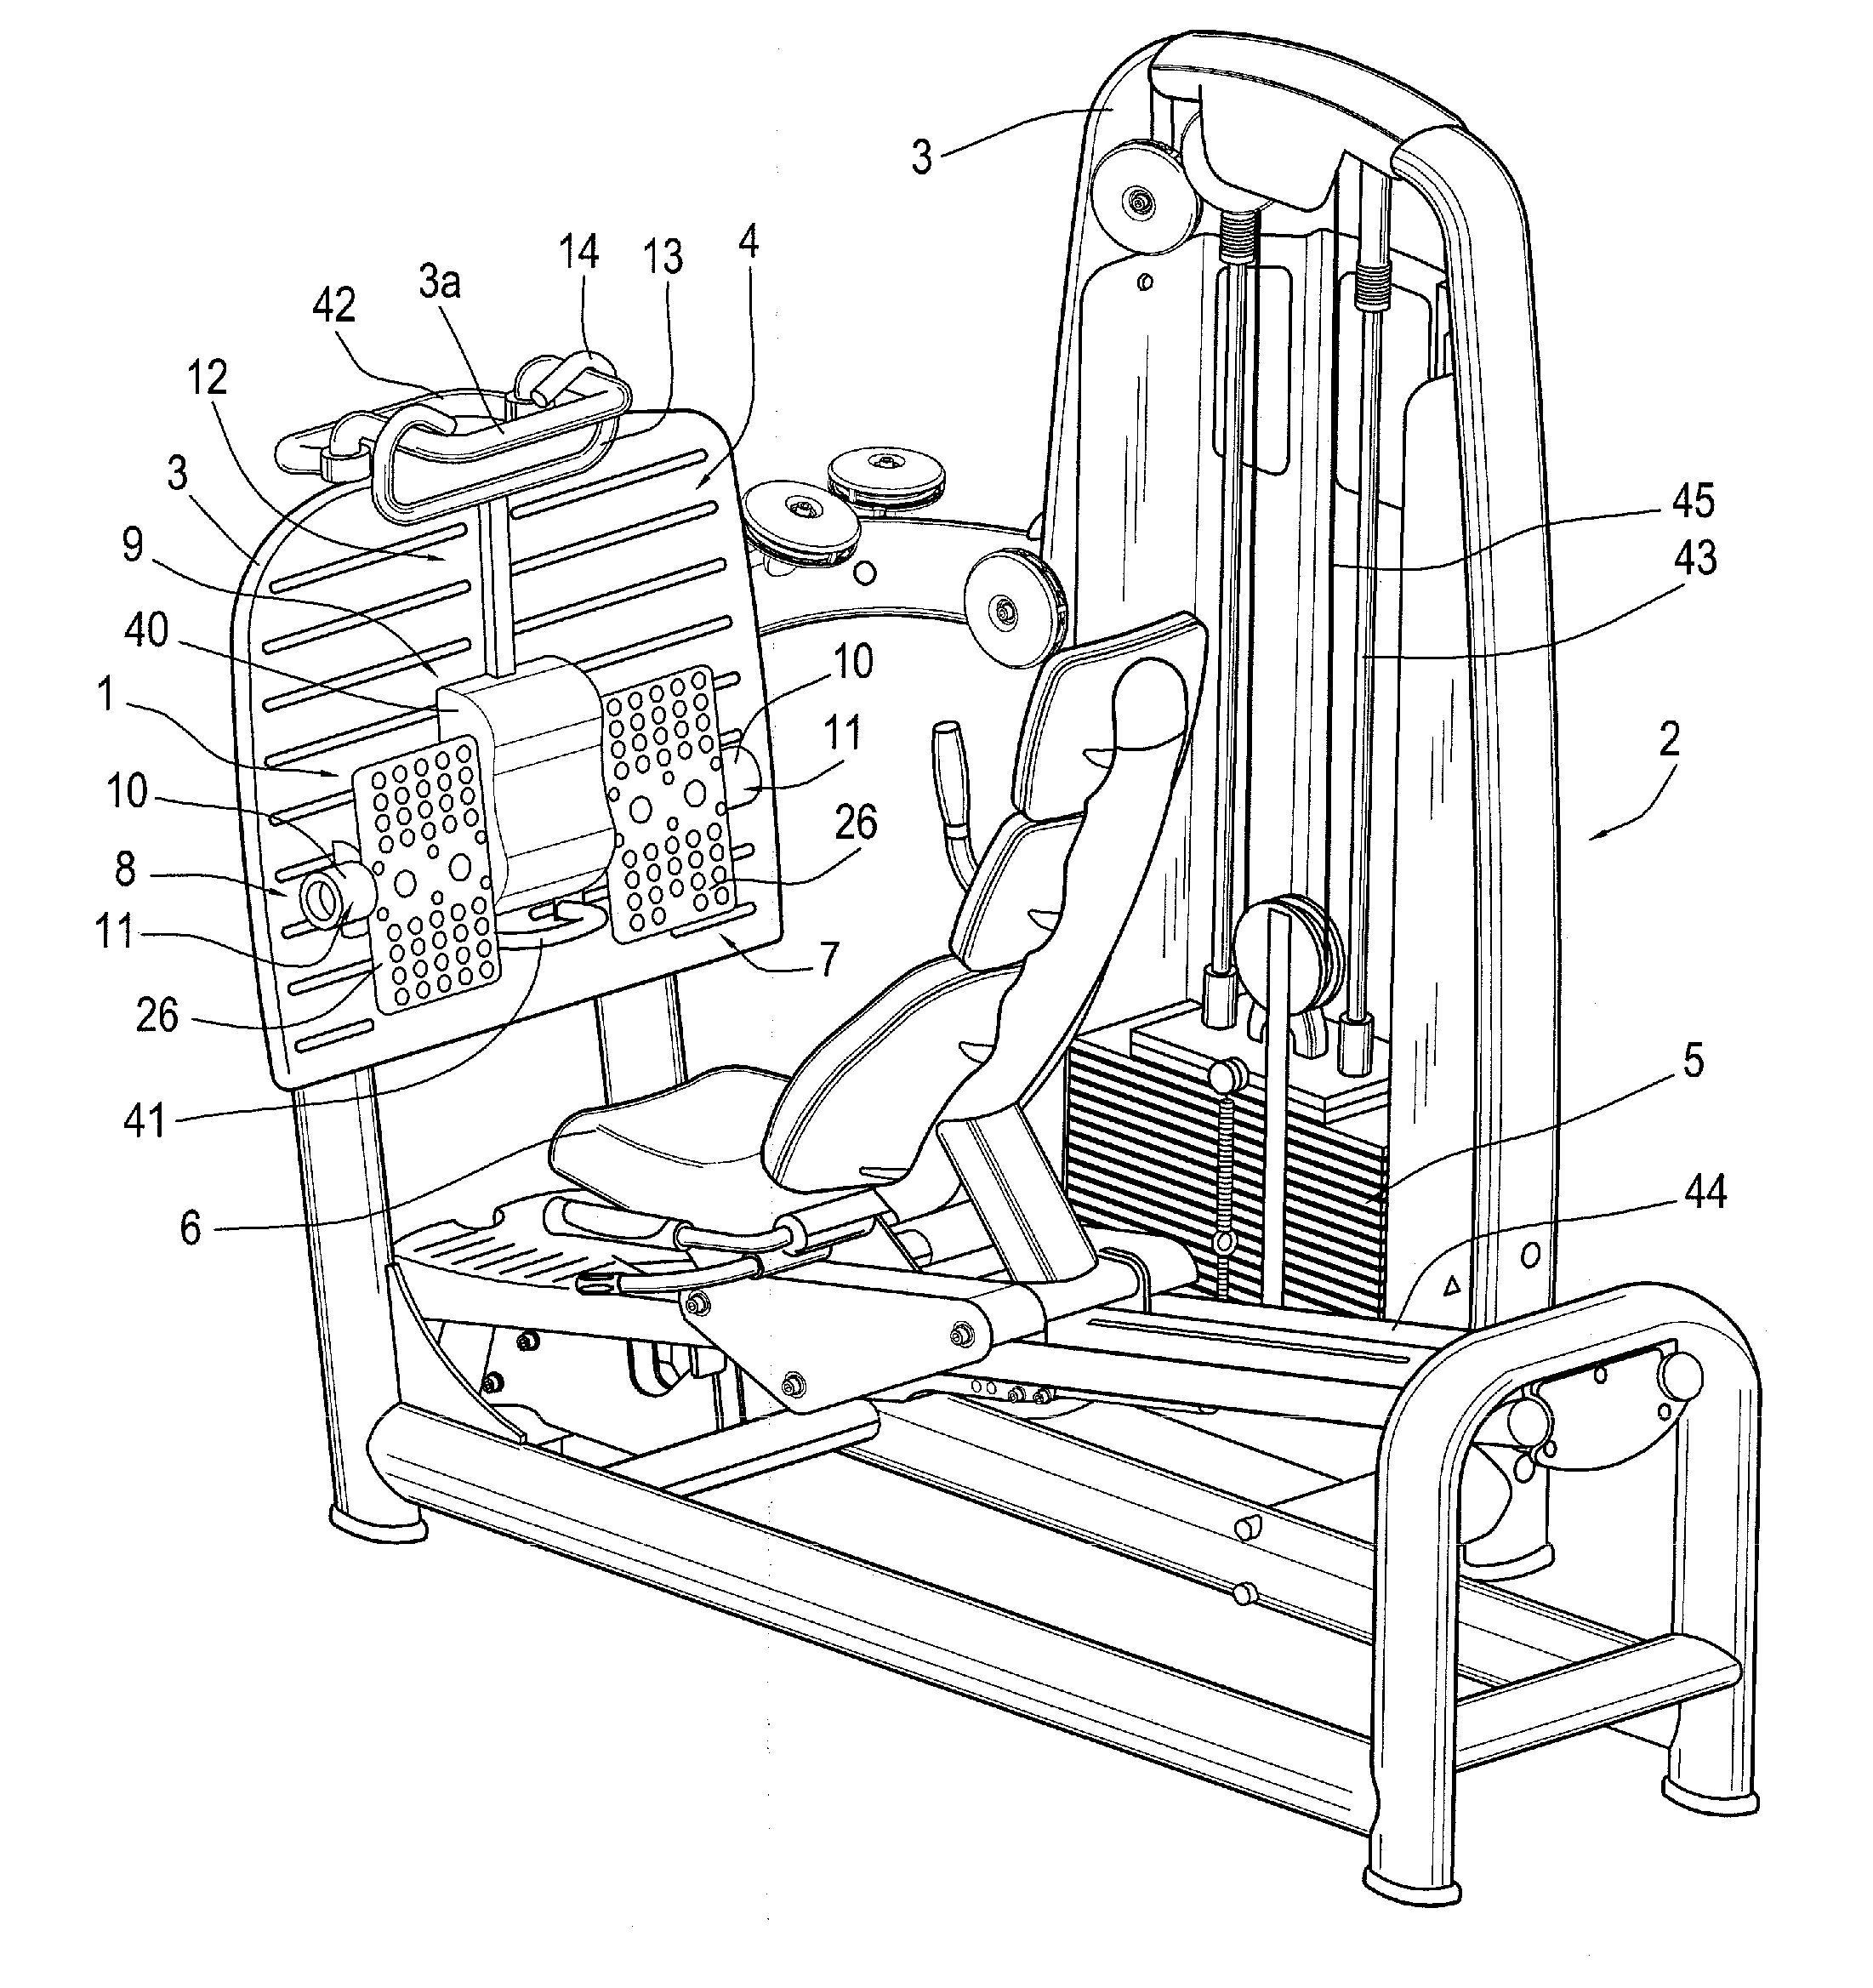 Device for an exercise machine